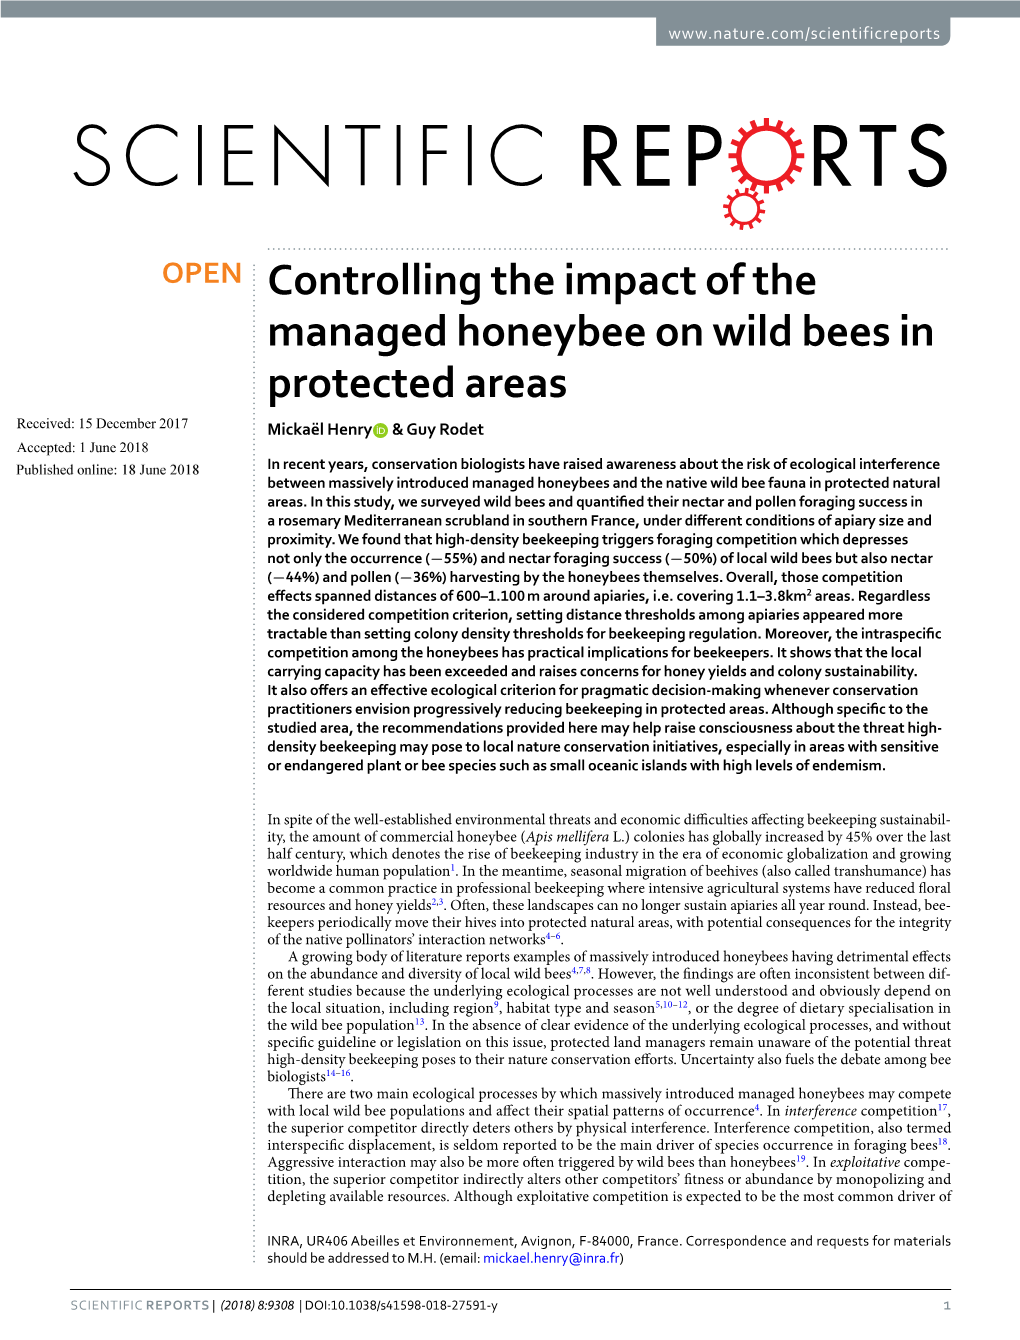 Controlling the Impact of the Managed Honeybee on Wild Bees In